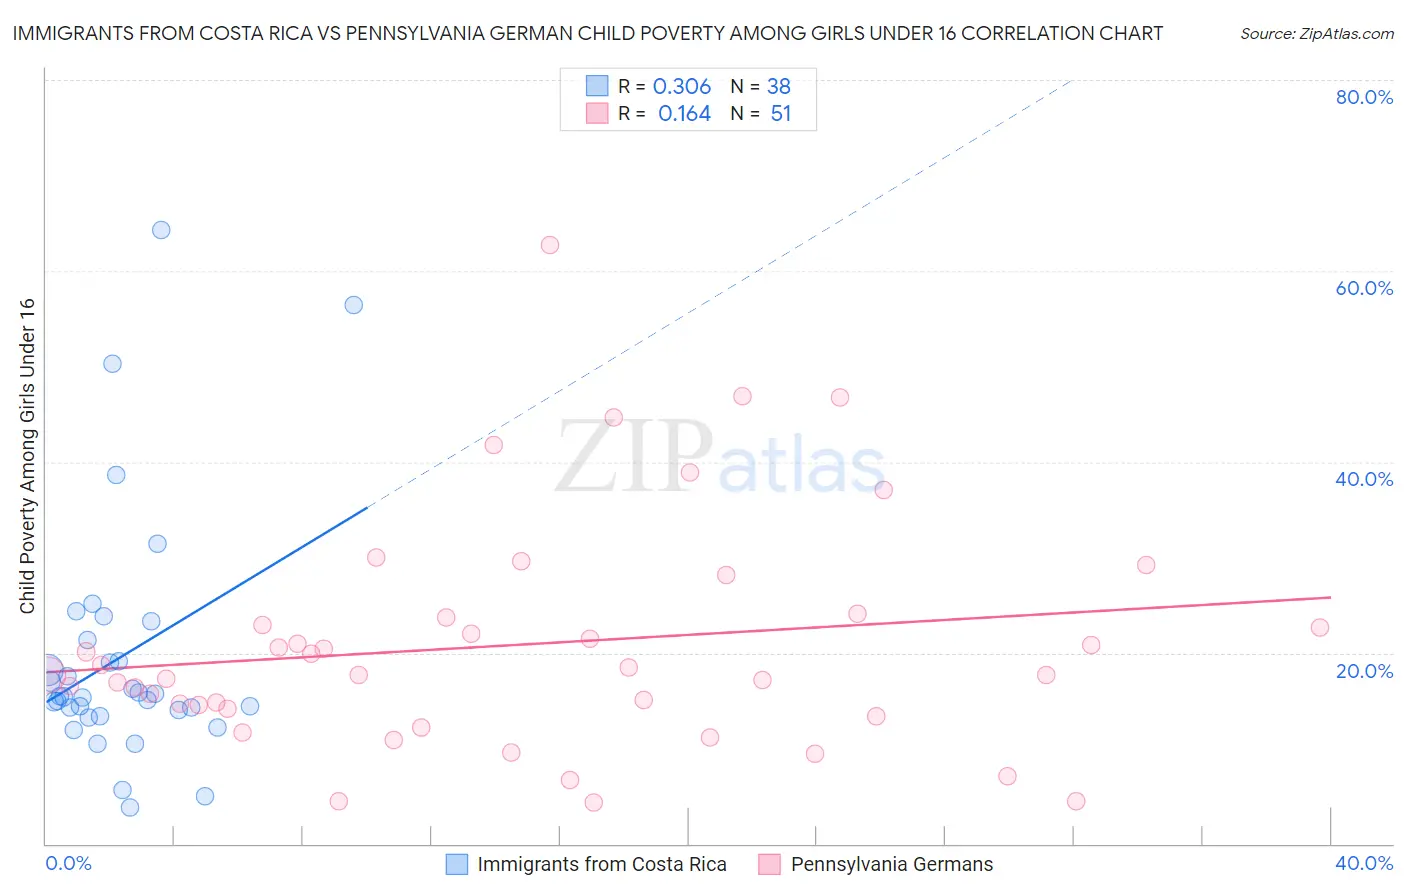 Immigrants from Costa Rica vs Pennsylvania German Child Poverty Among Girls Under 16